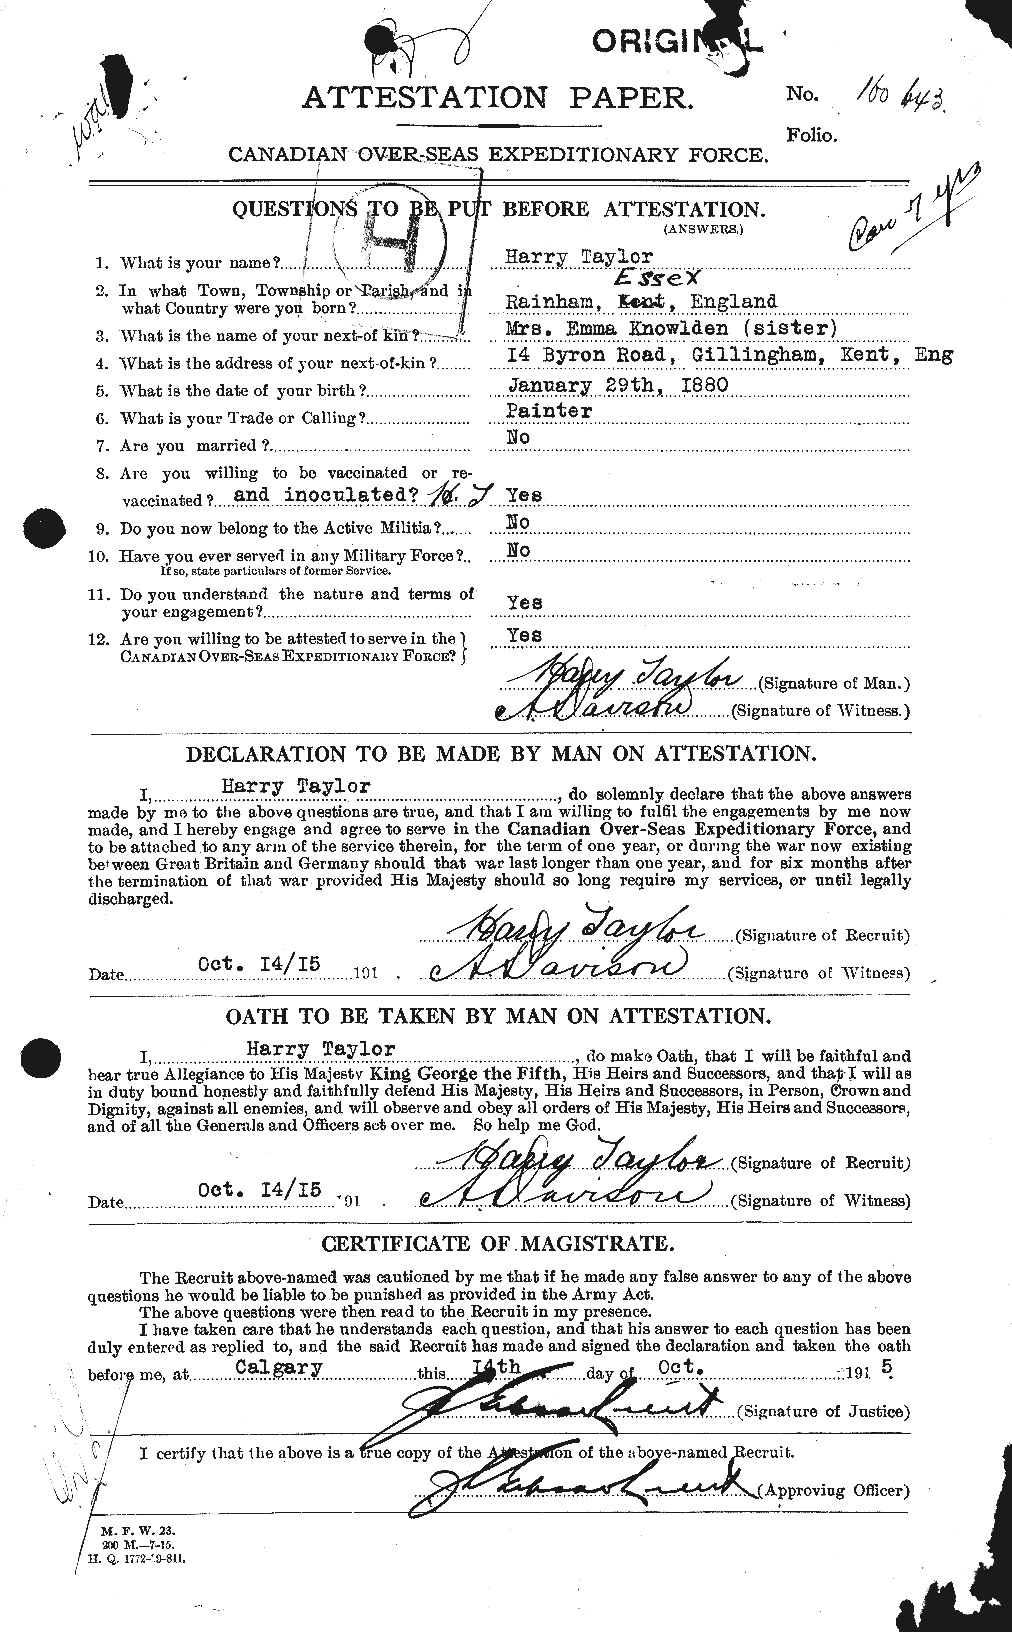 Personnel Records of the First World War - CEF 626458a